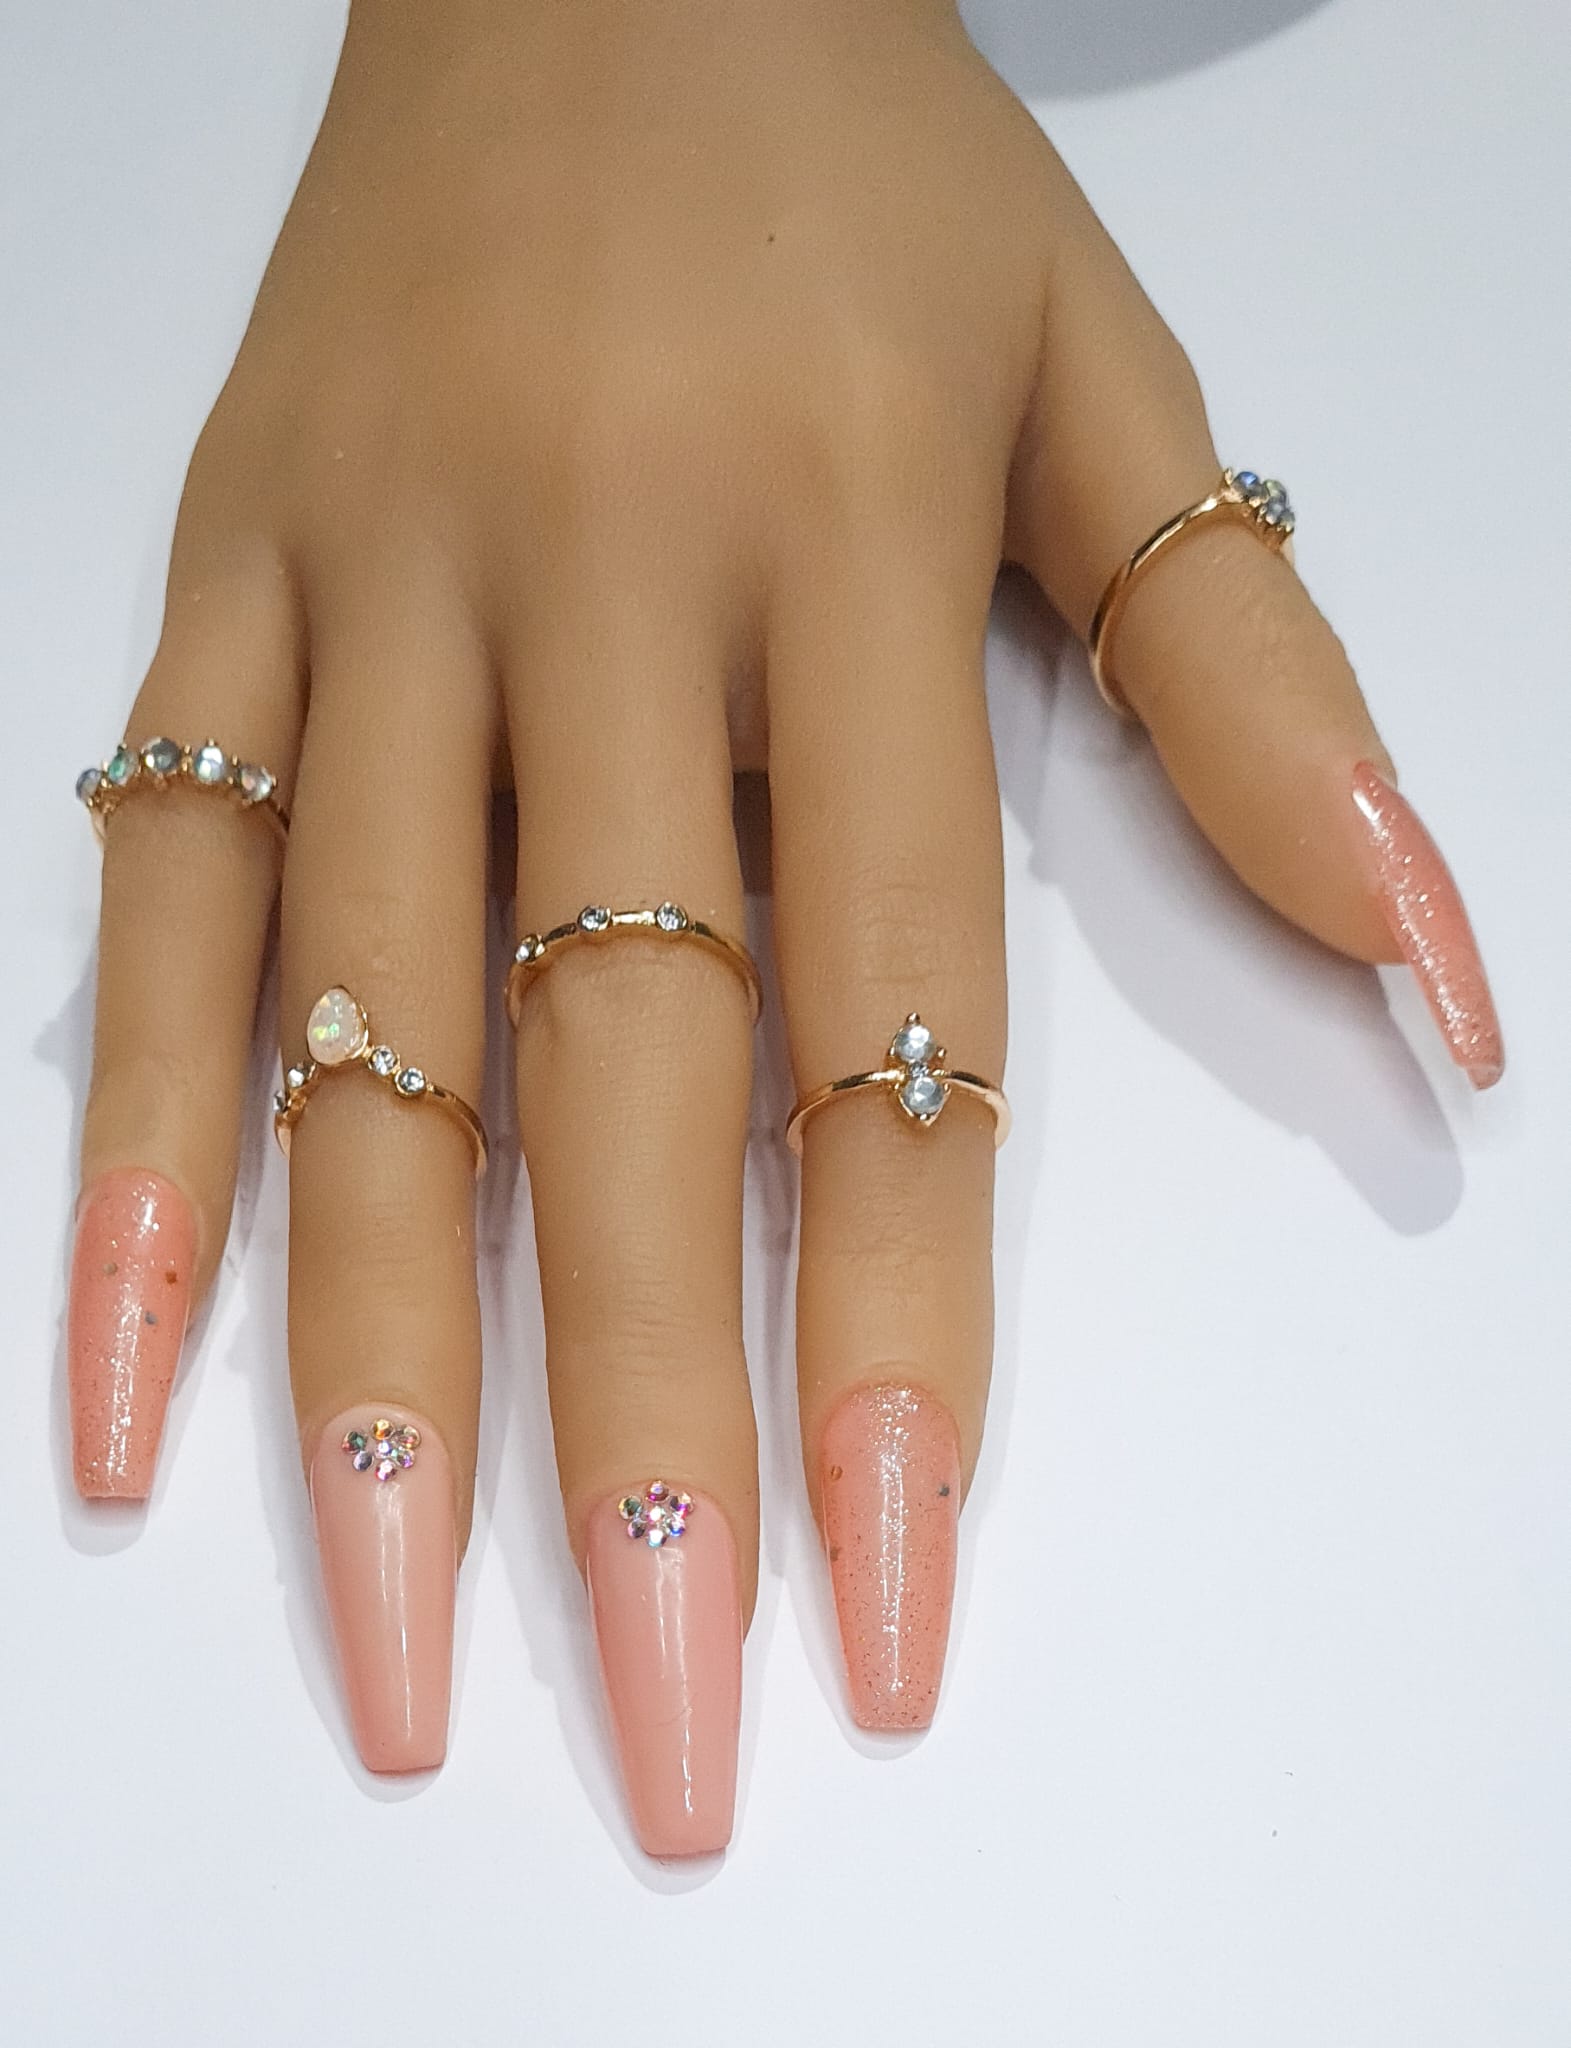  Press On Nails - Medium Coffin Shaped Nude Glitter with Rhinestone details bling spring summer collection full cover gel tip luxury false nails salon quality hand painted custom made uk